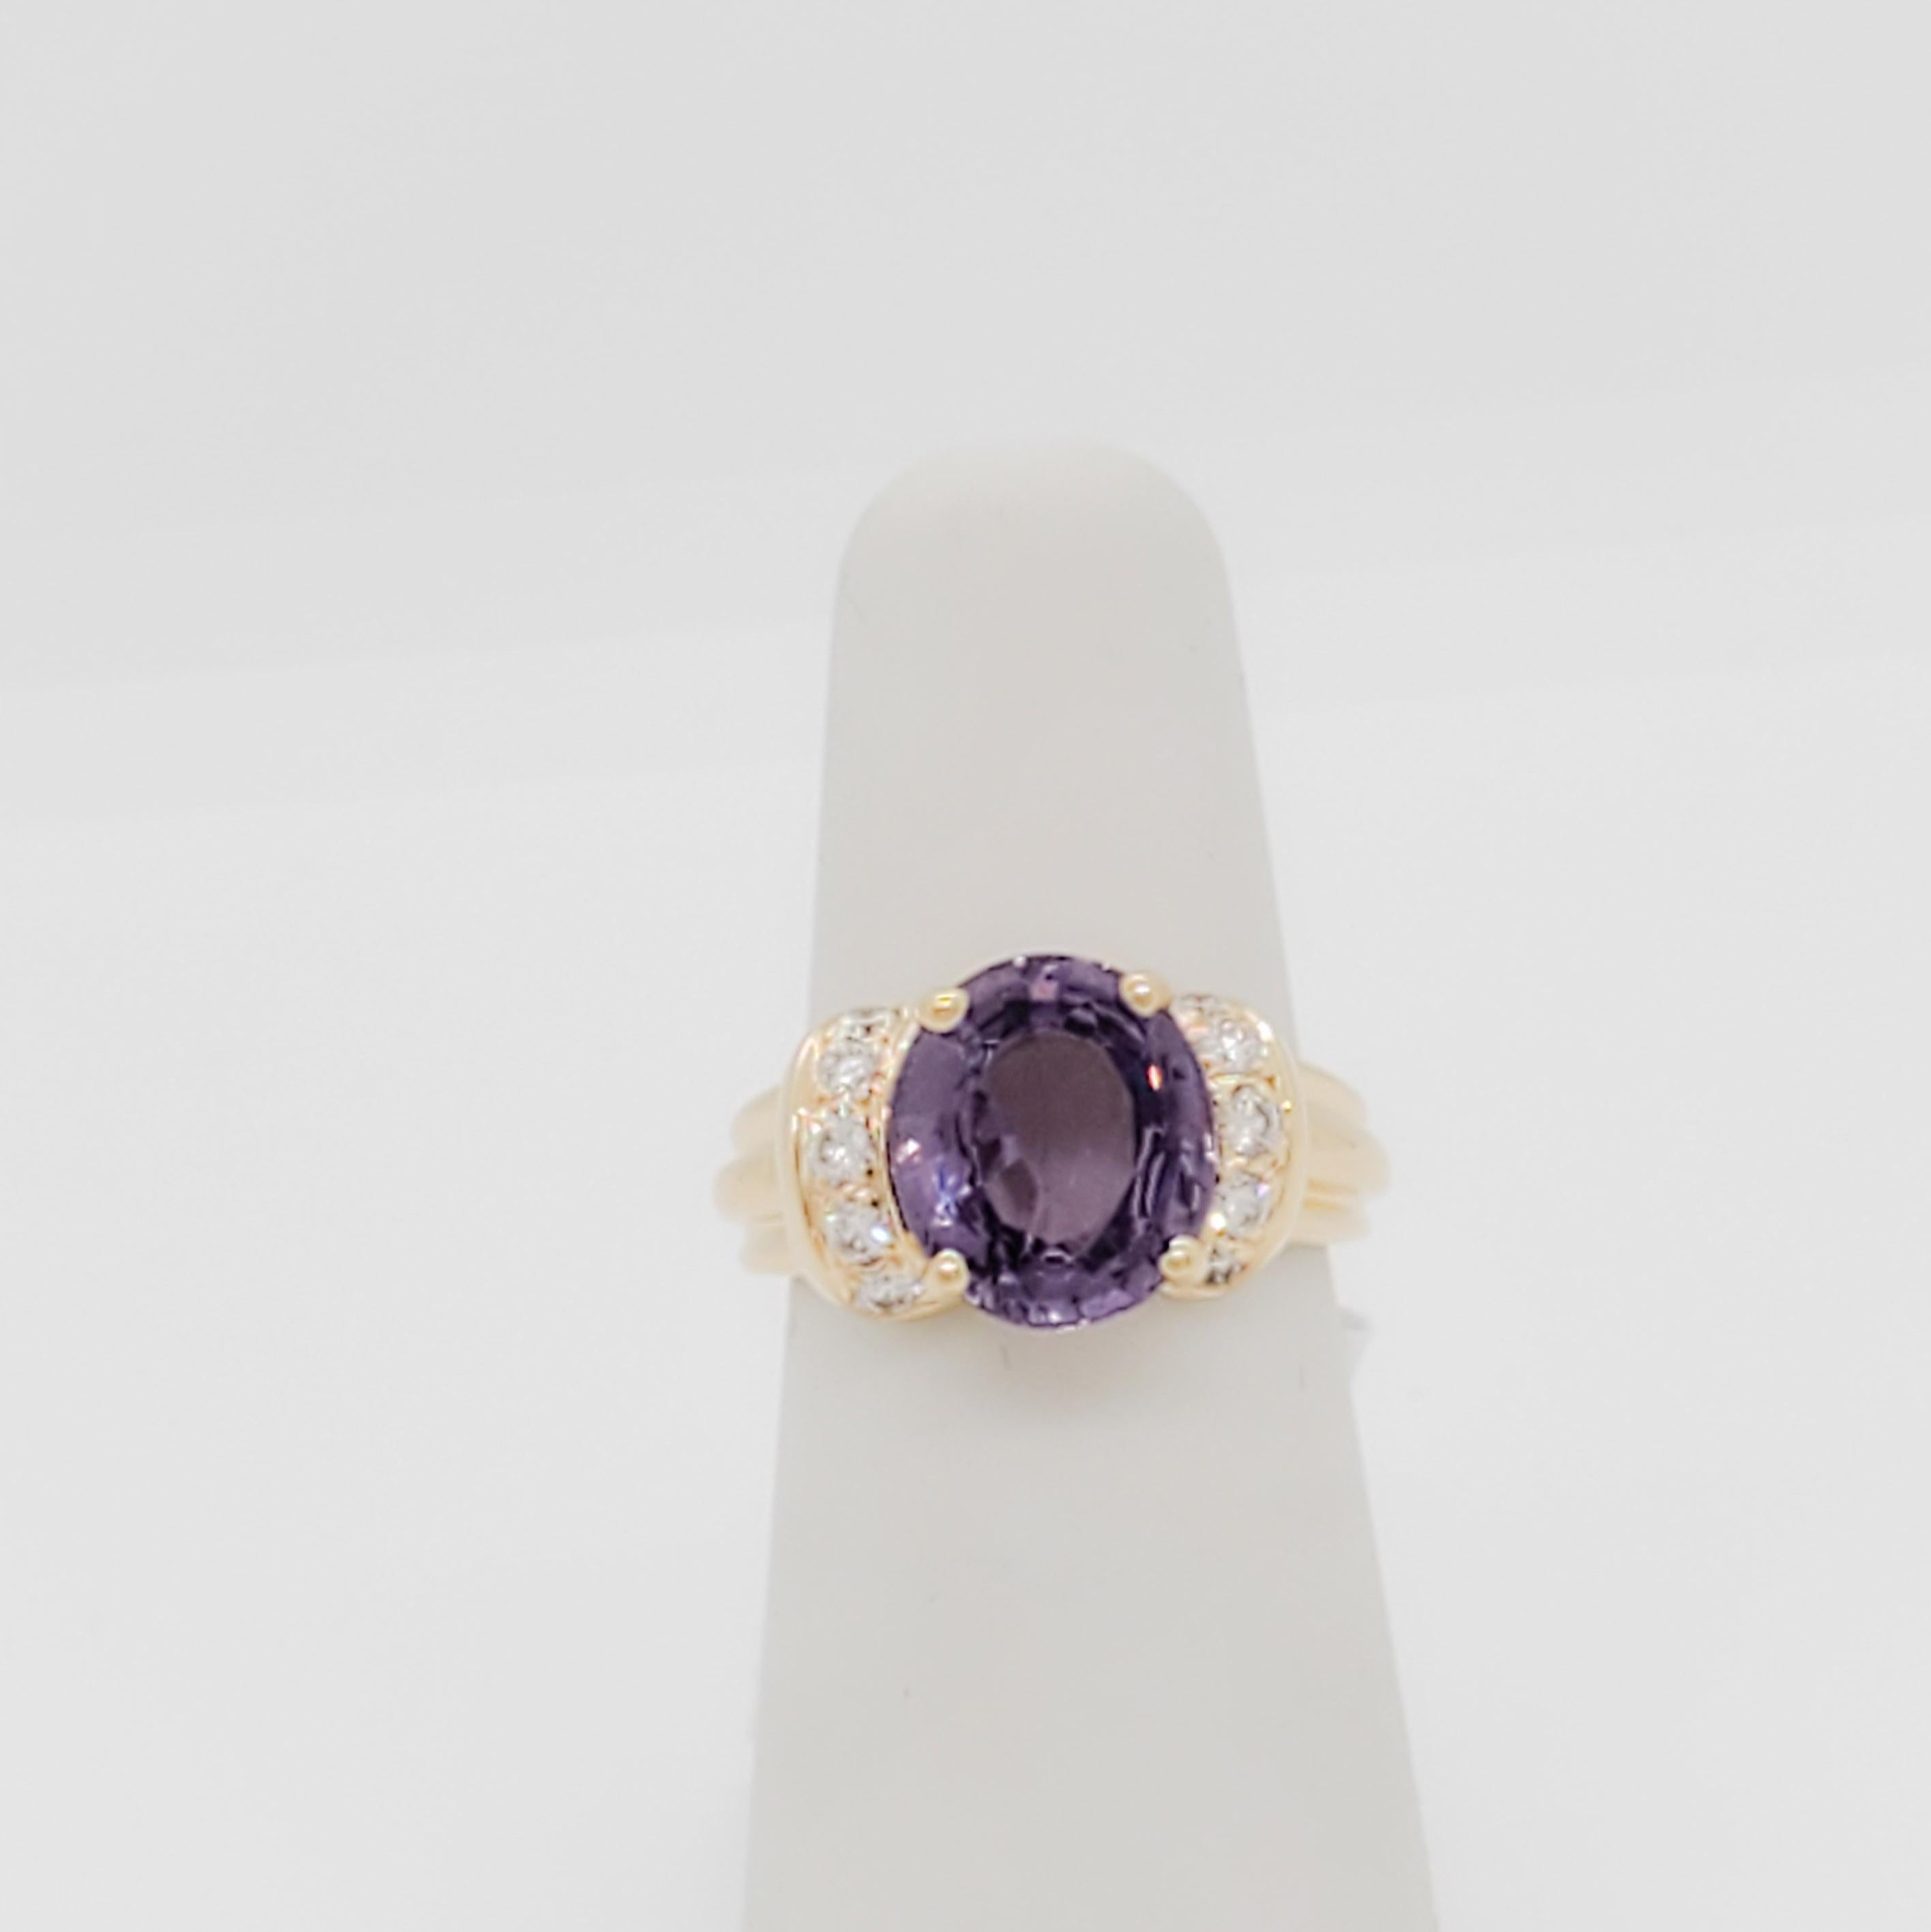 Gorgeous 3.28 ct. purple sapphire oval with 0.10 ct. white diamond rounds.  Handmade in 14k yellow gold.  Ring size 3.75.